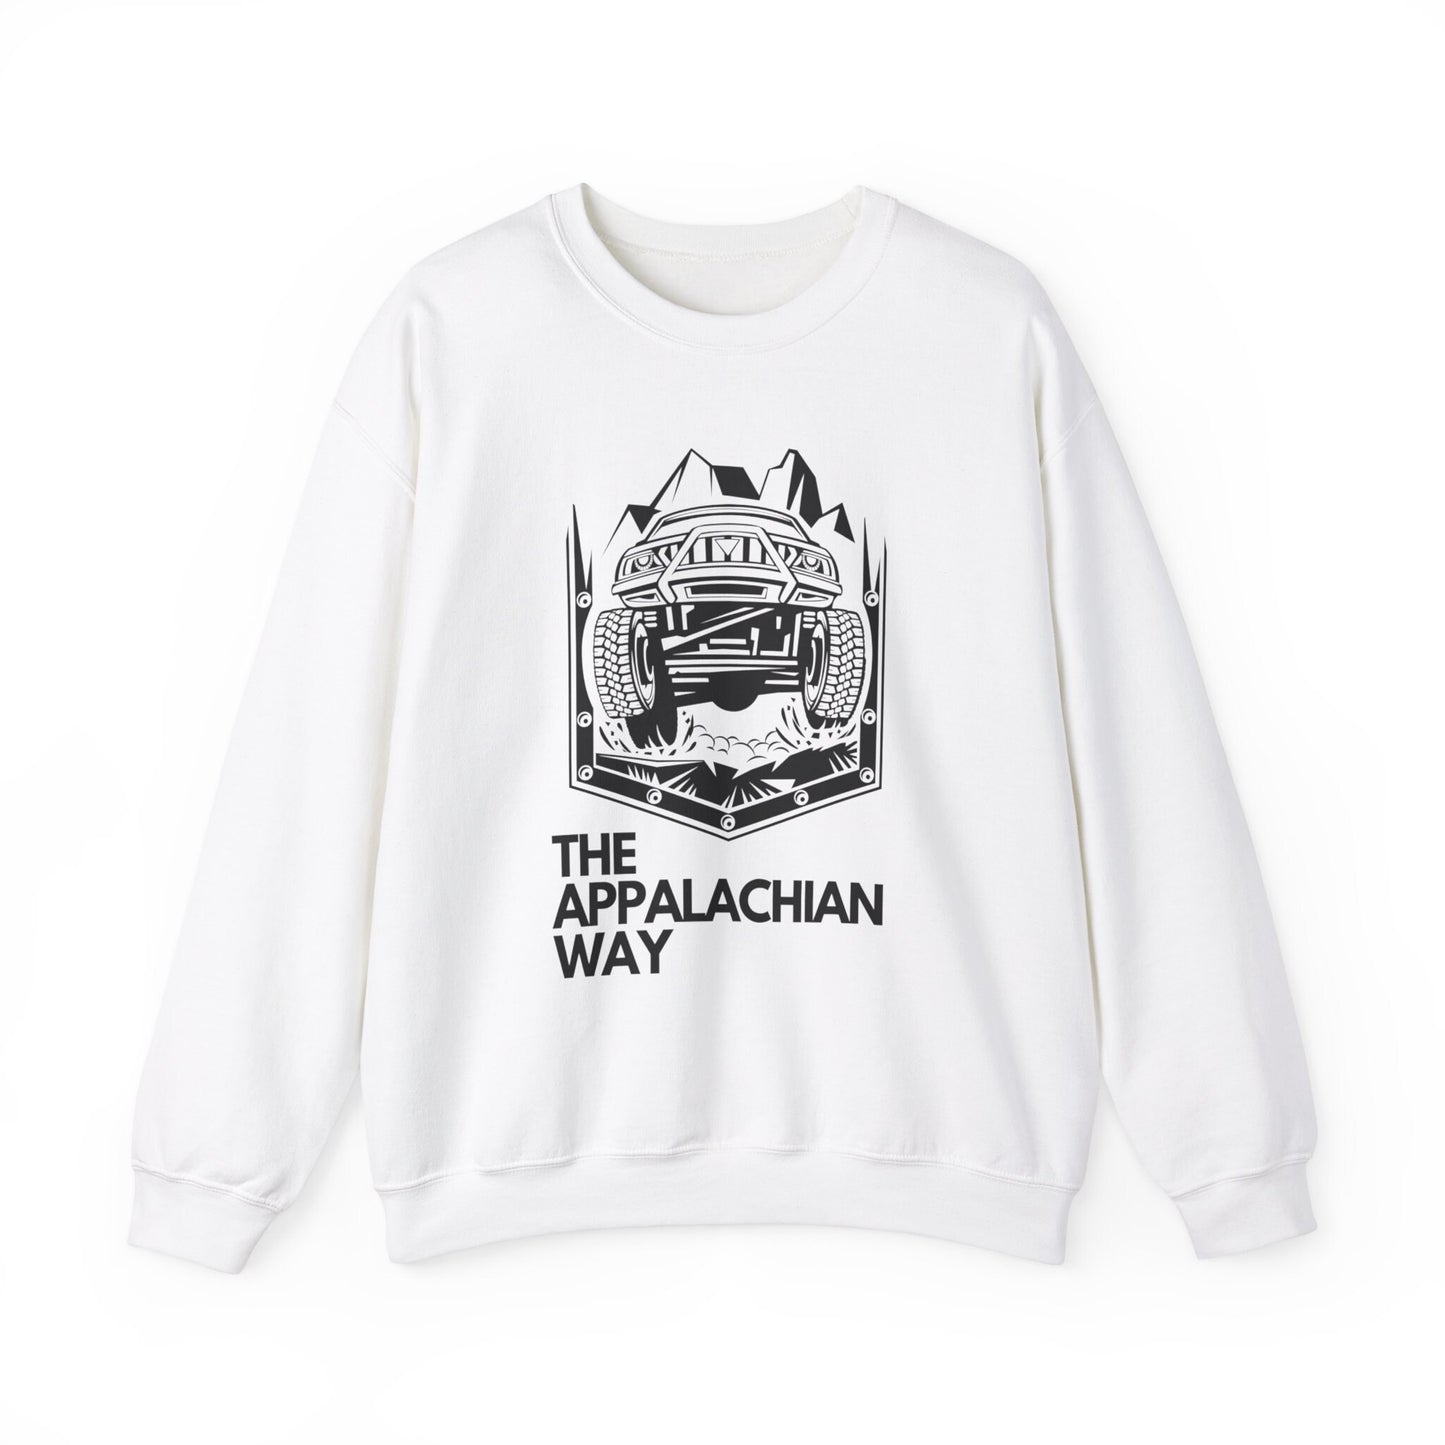 Off Road Monster Truck The Appalachian Way Crewneck Sweatshirt | Monster Truck. Truck sweatshirt. 4x4. Gifts for him. appalachian